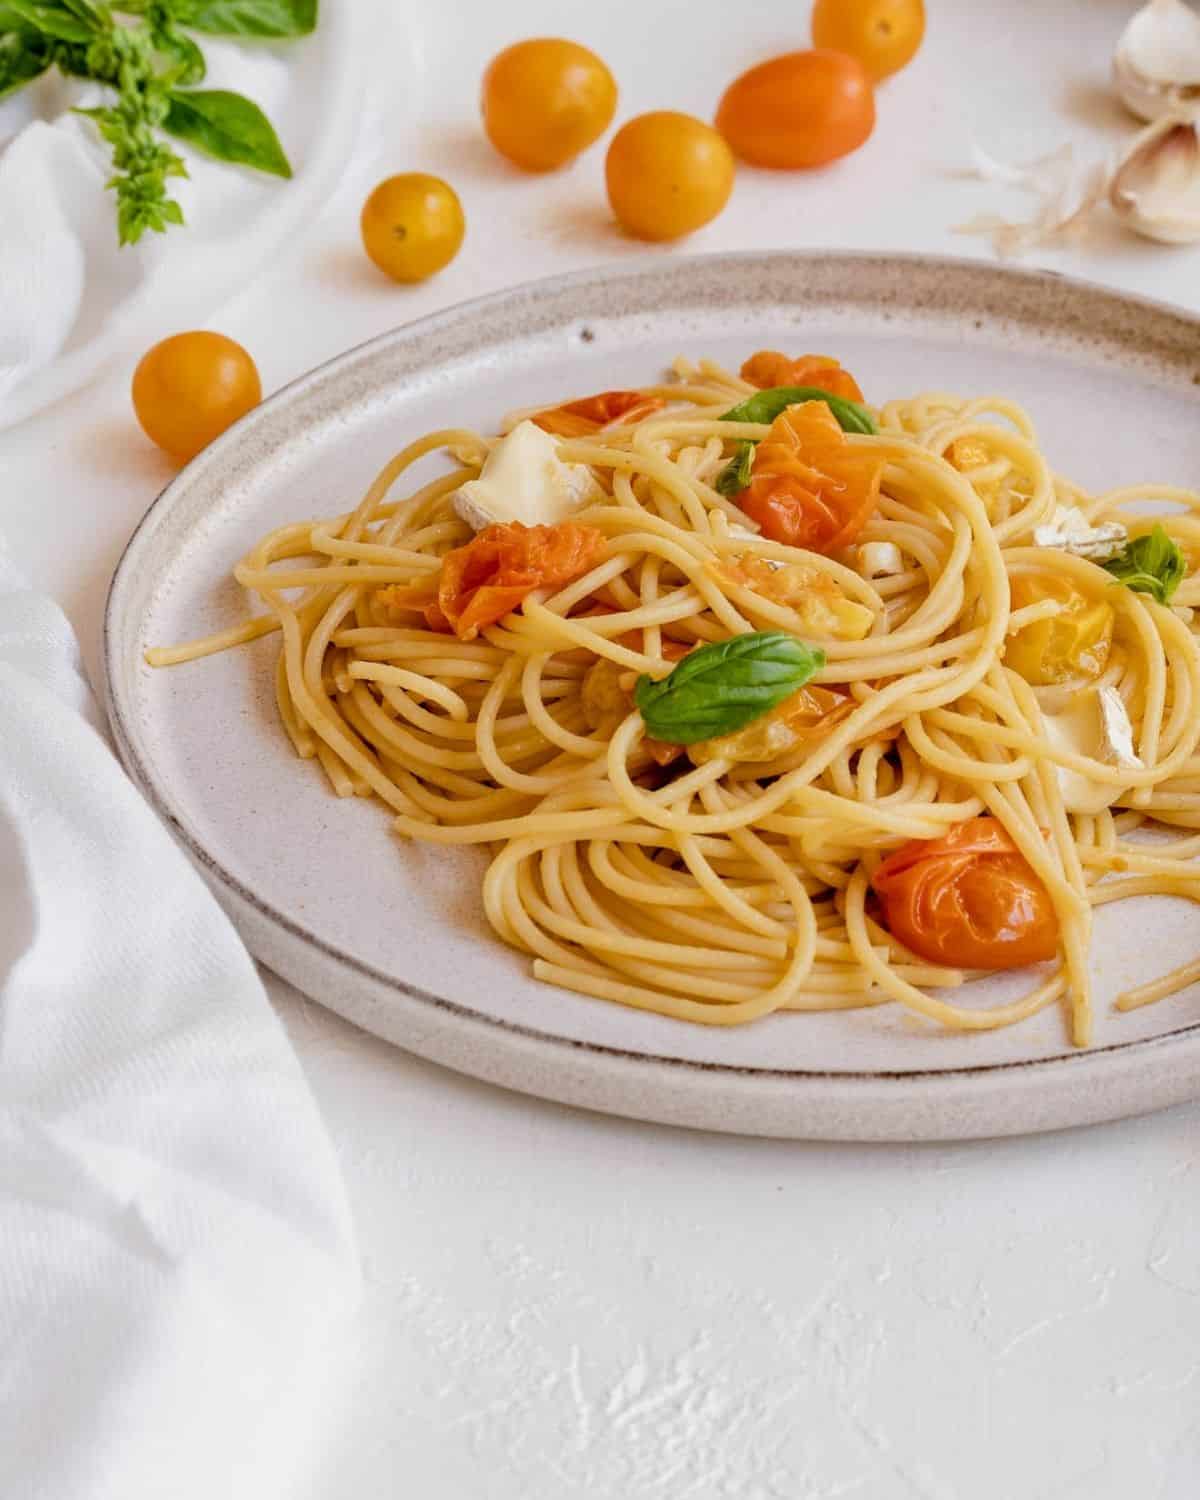 Cherry tomatoes pasta with Brie cheese on top